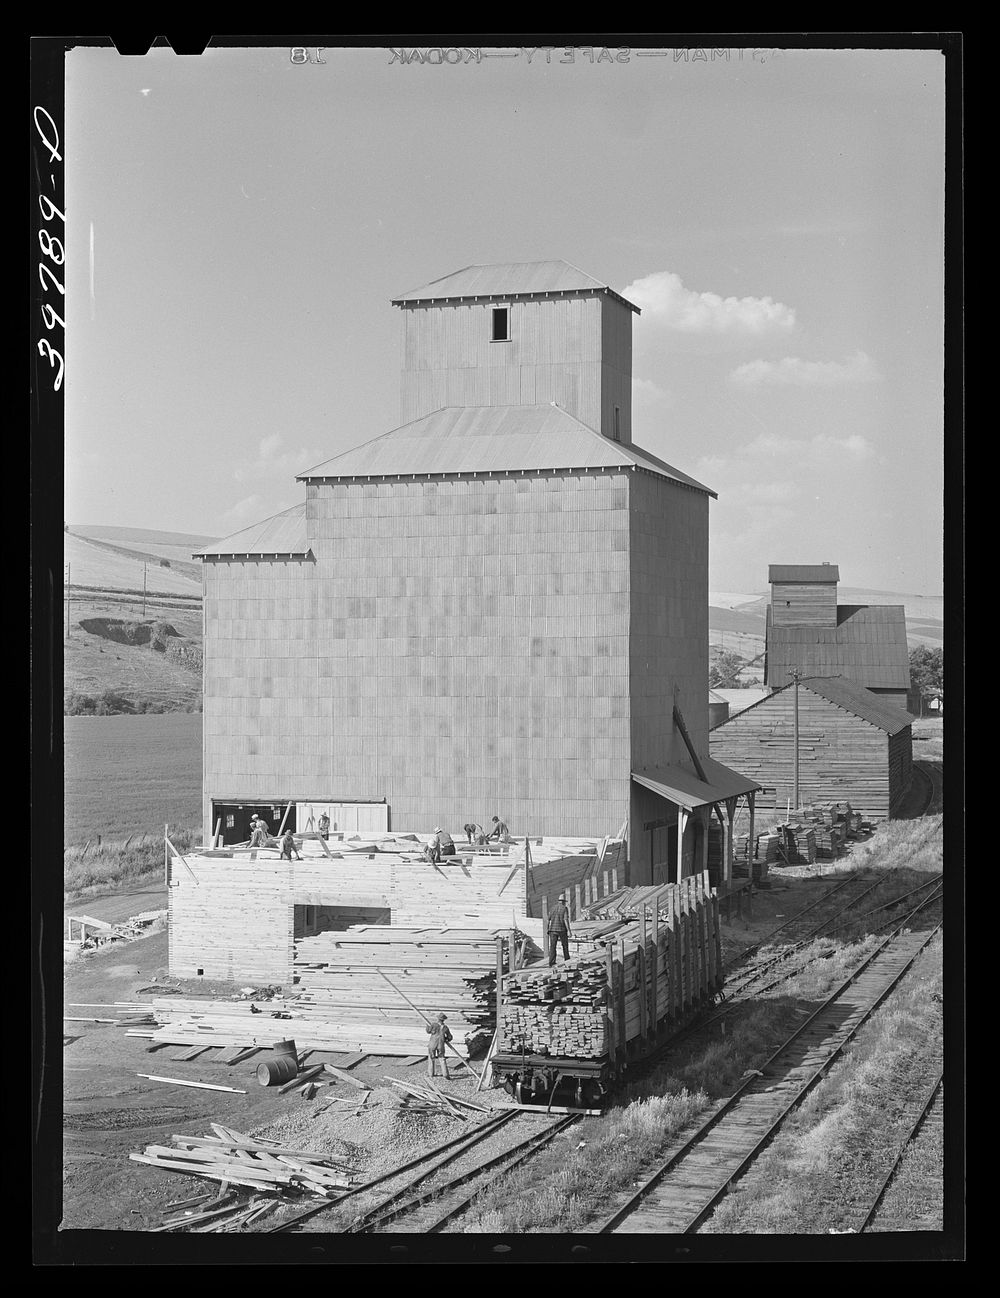 [Untitled photo, possibly related to: Adding new storage space to wheat elevator at Dayton, Washington. They were getting…